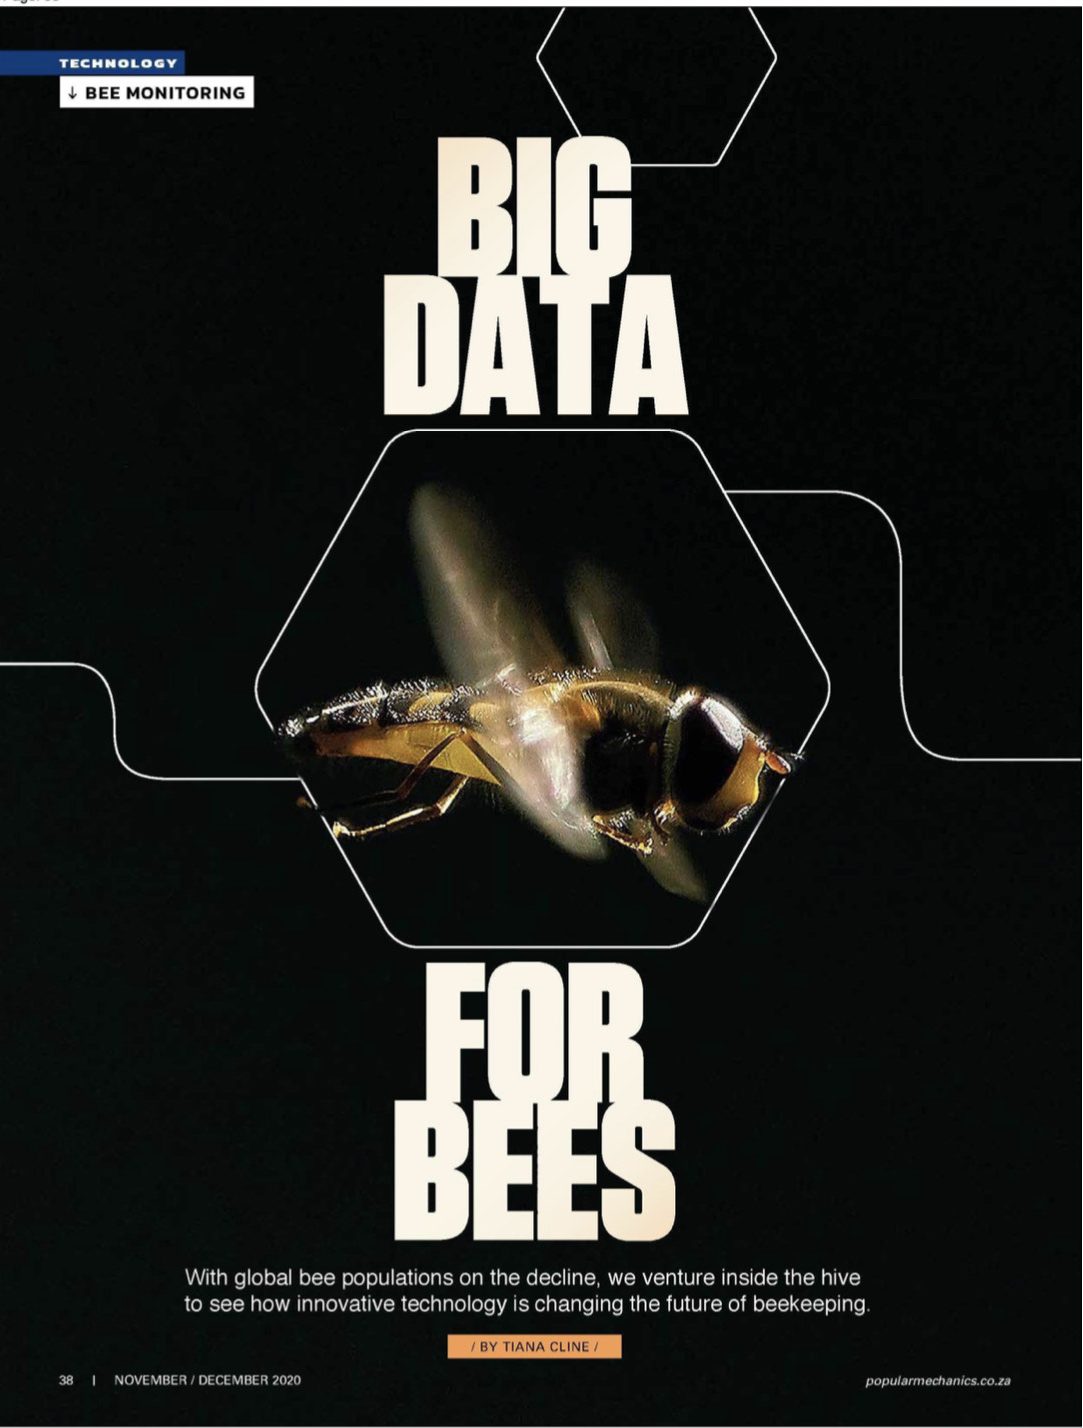 Big data for bees